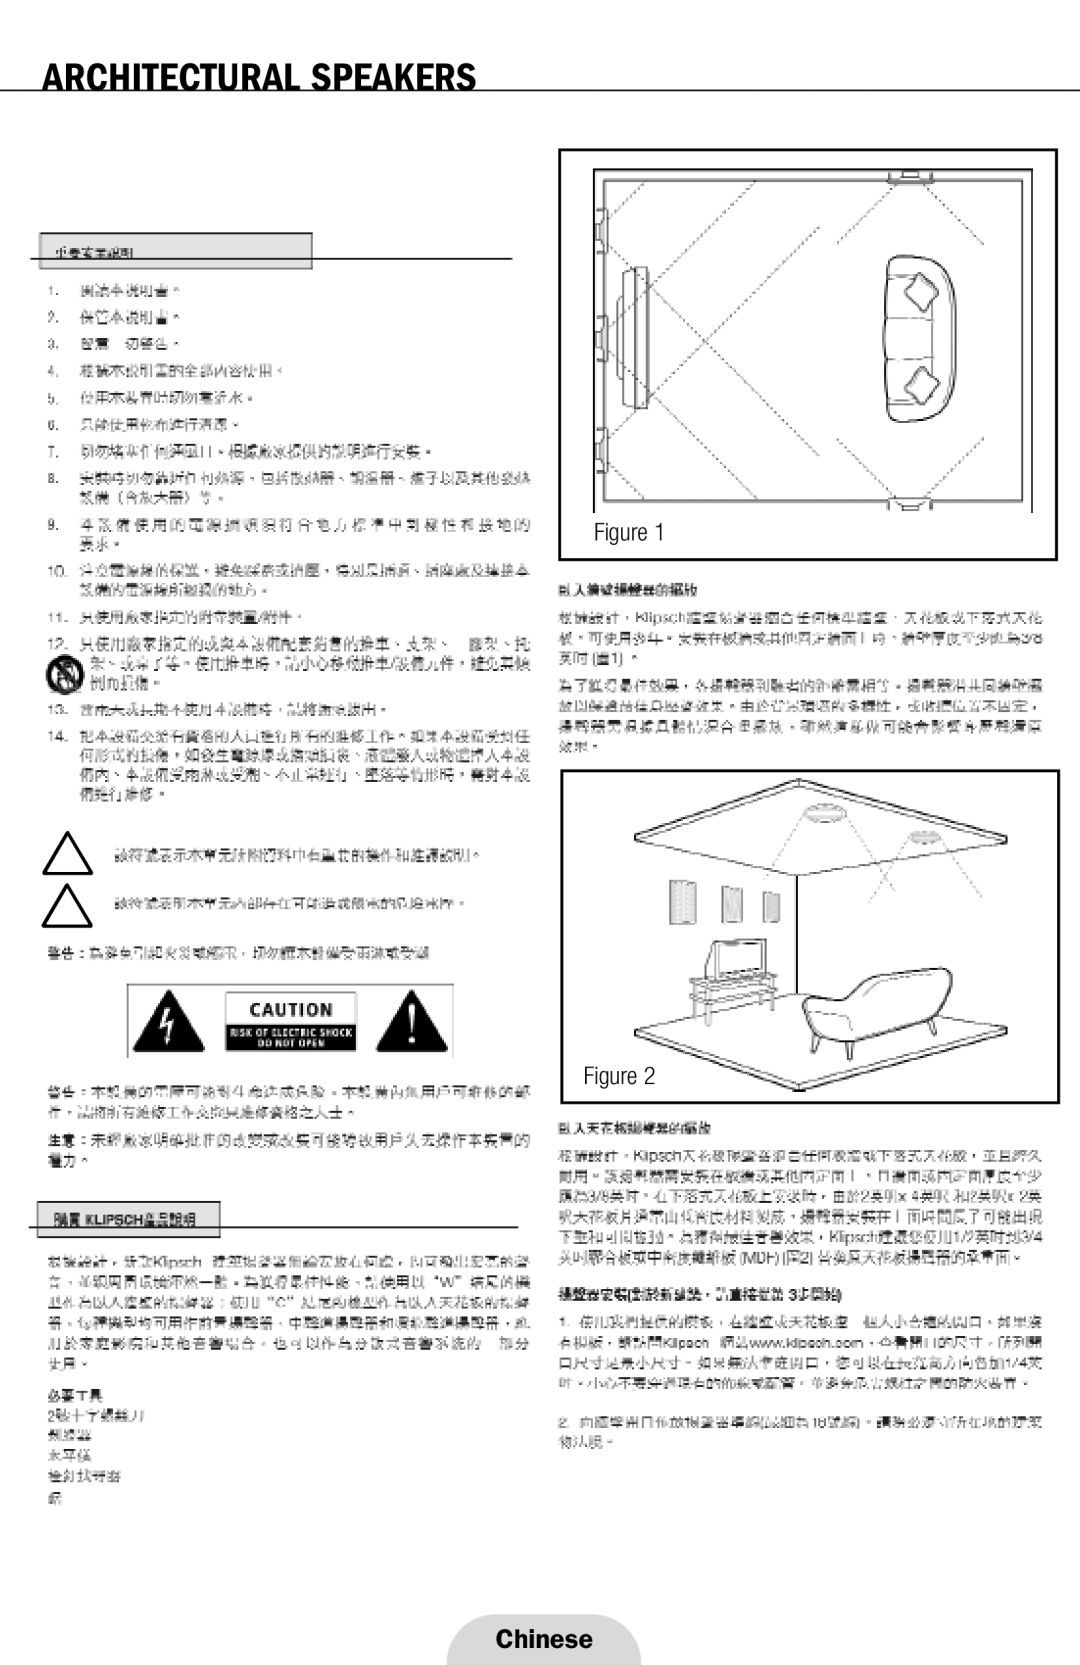 Klipsch ARCHITECTURAL SPEAKERS manual Chinese, Figure Figure, Architectural Speakers 